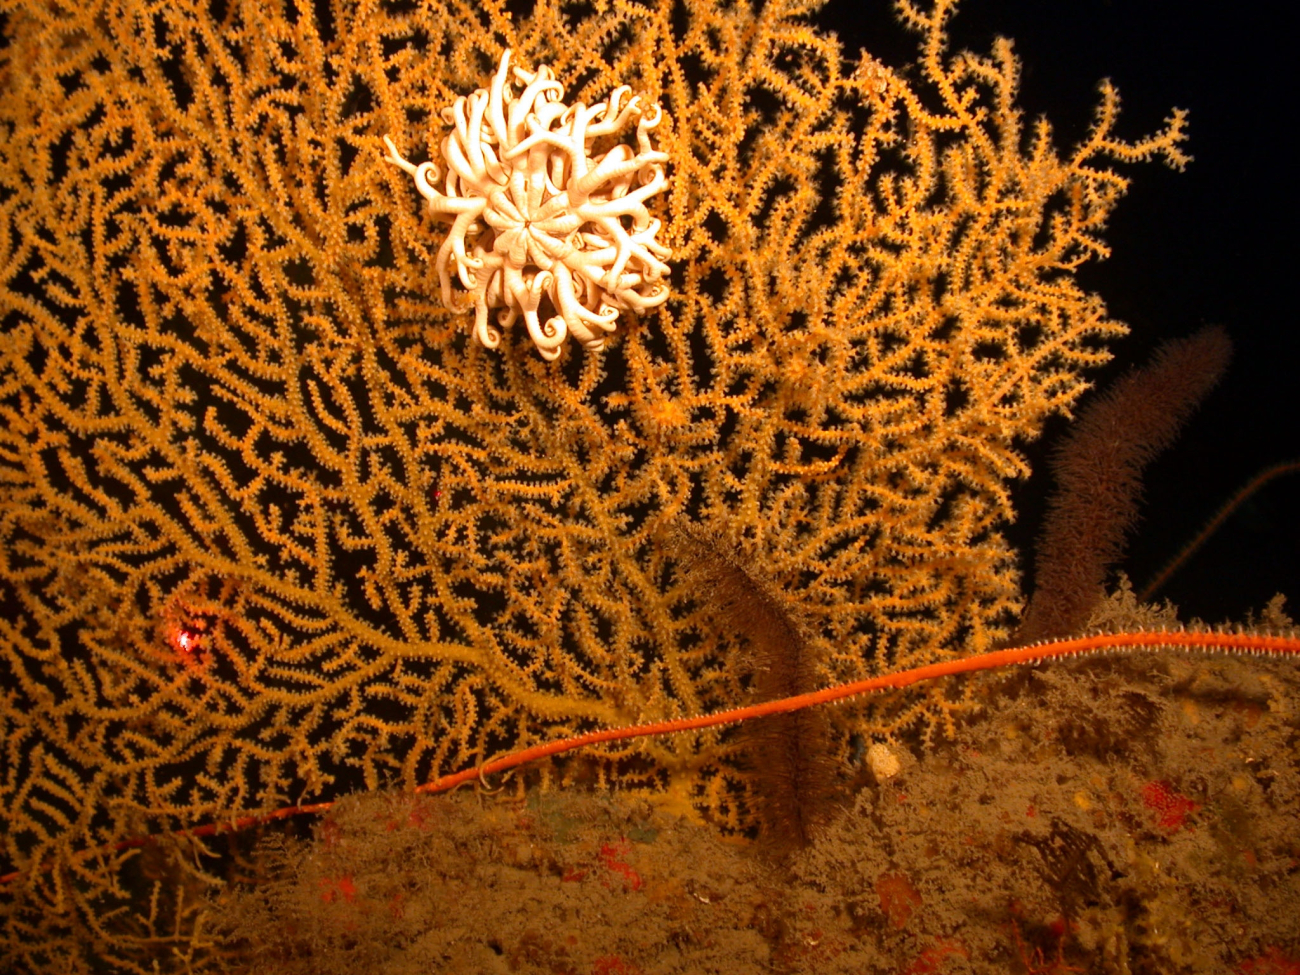 Gorgonian coral with intertwined basket star